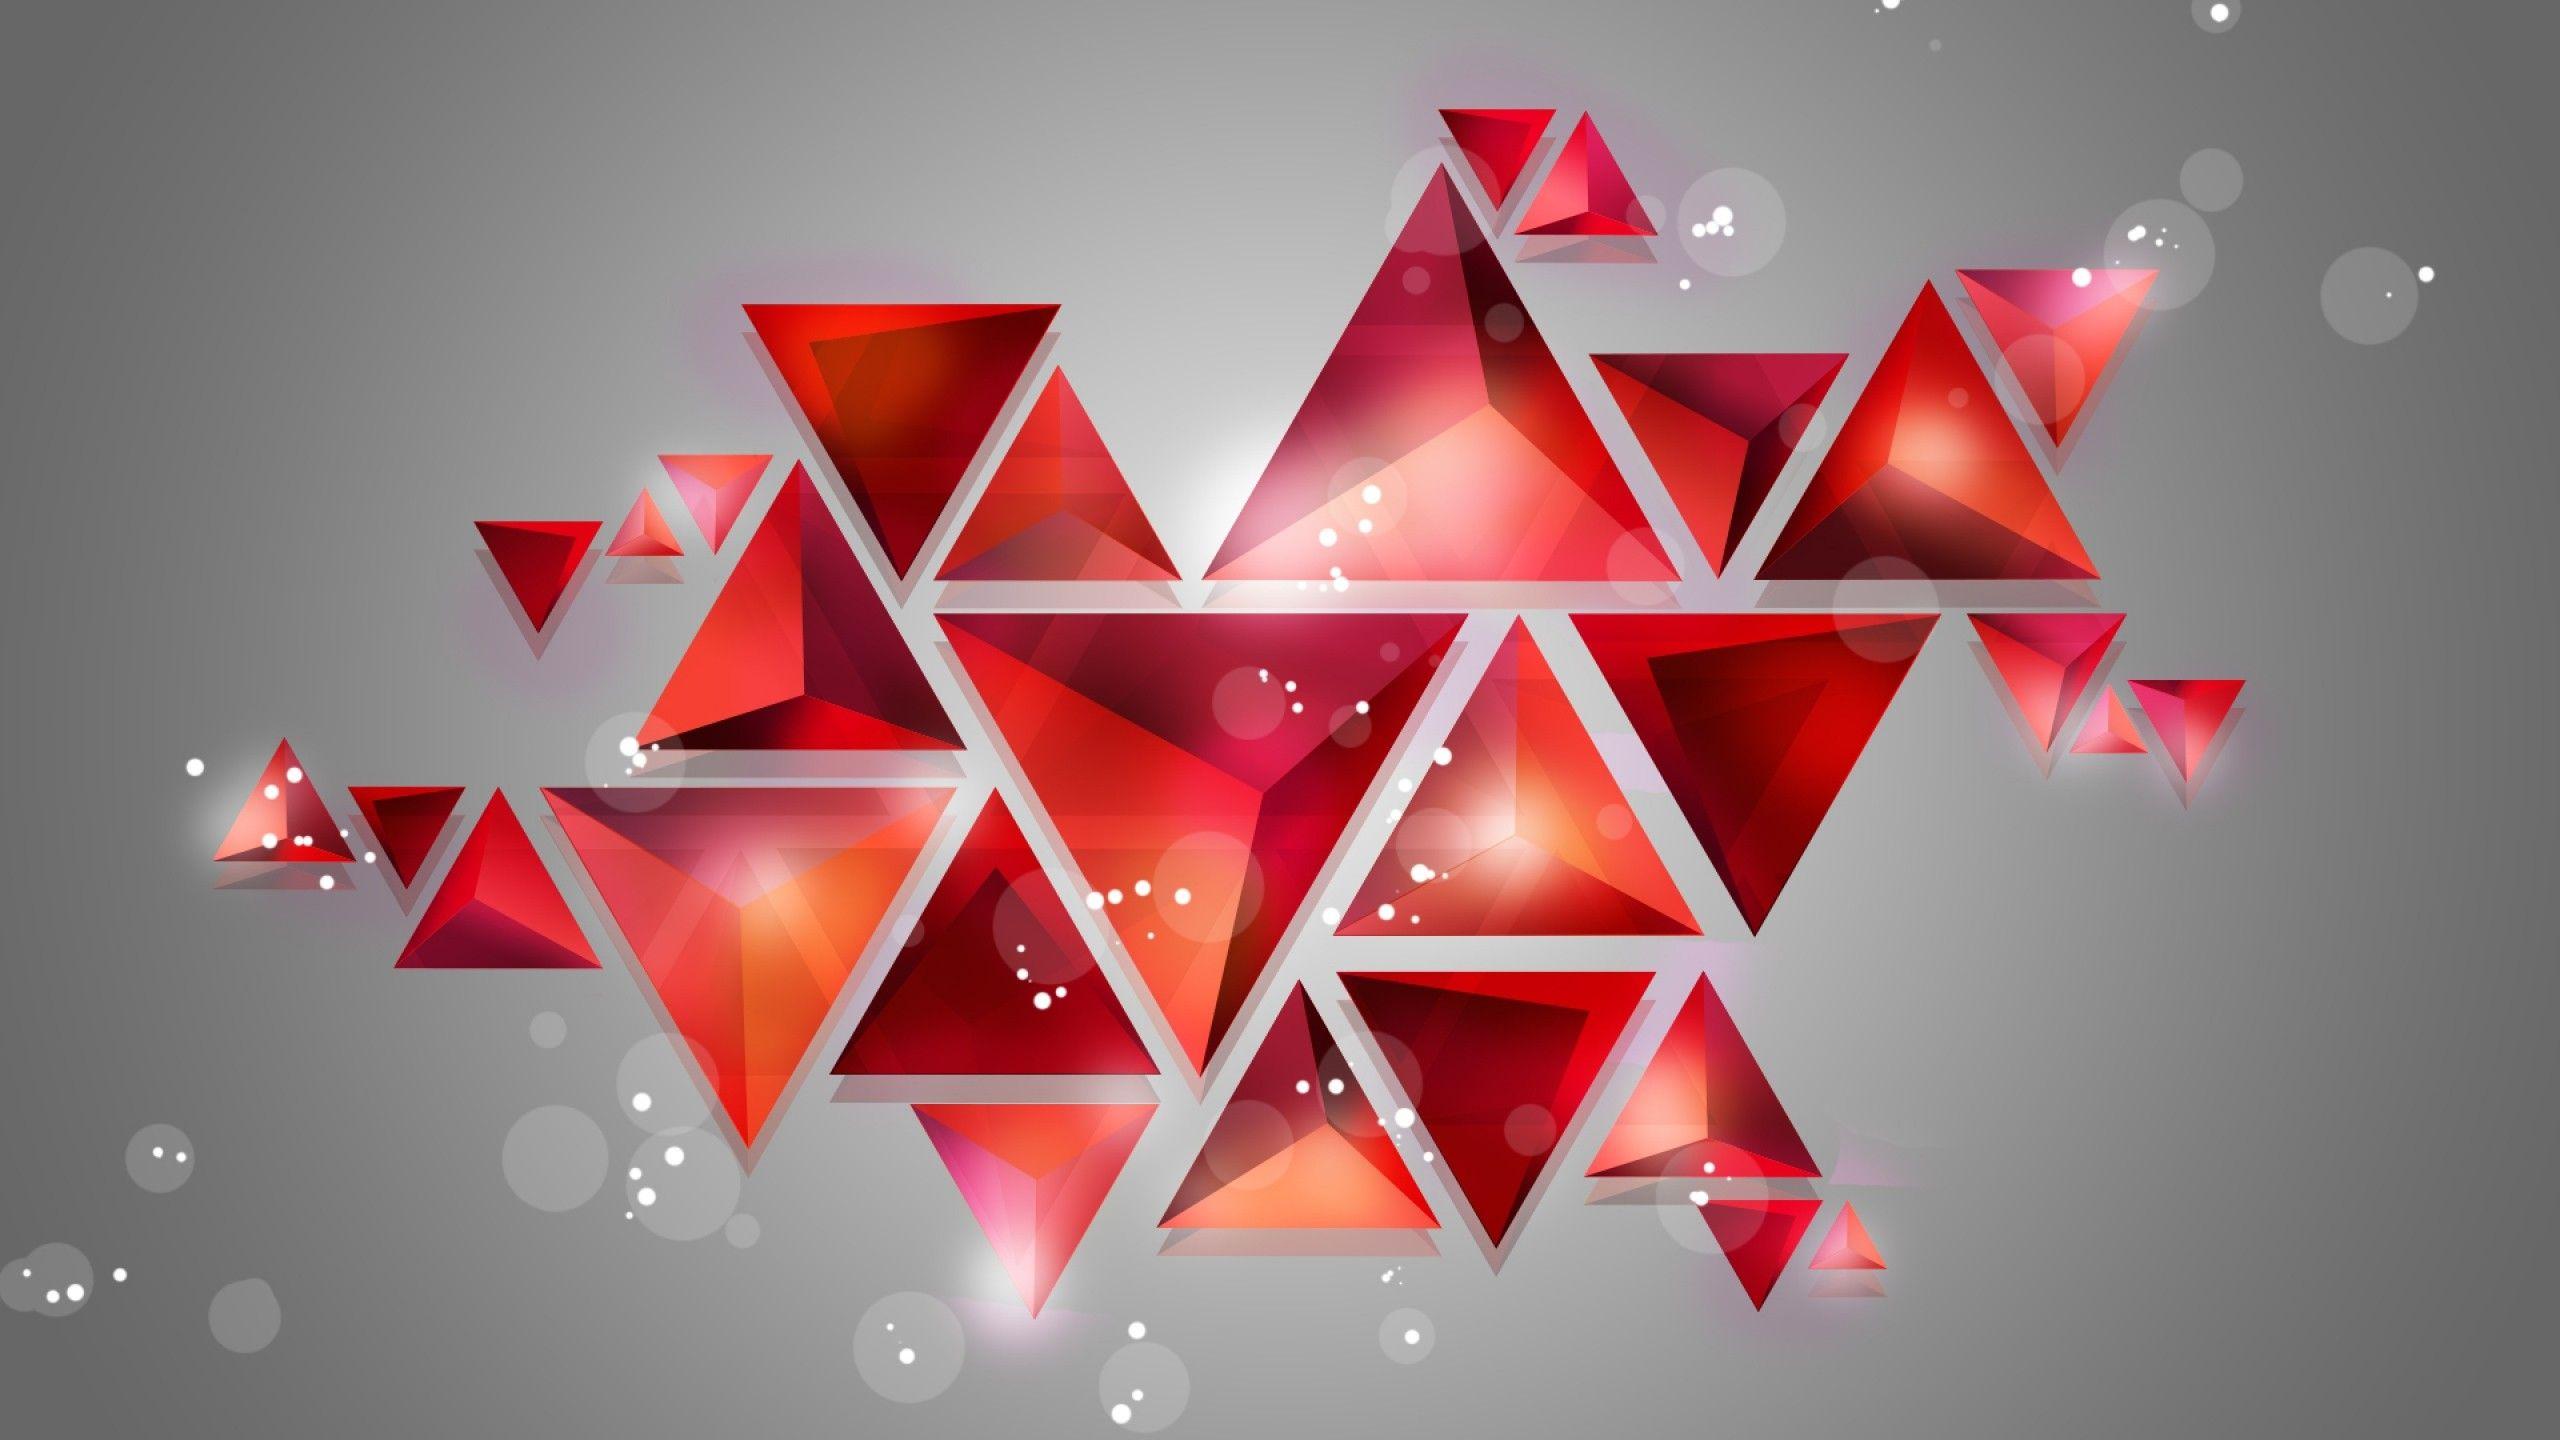 Red Geometric Shapes Wallpapers - Top Free Red Geometric Shapes ...